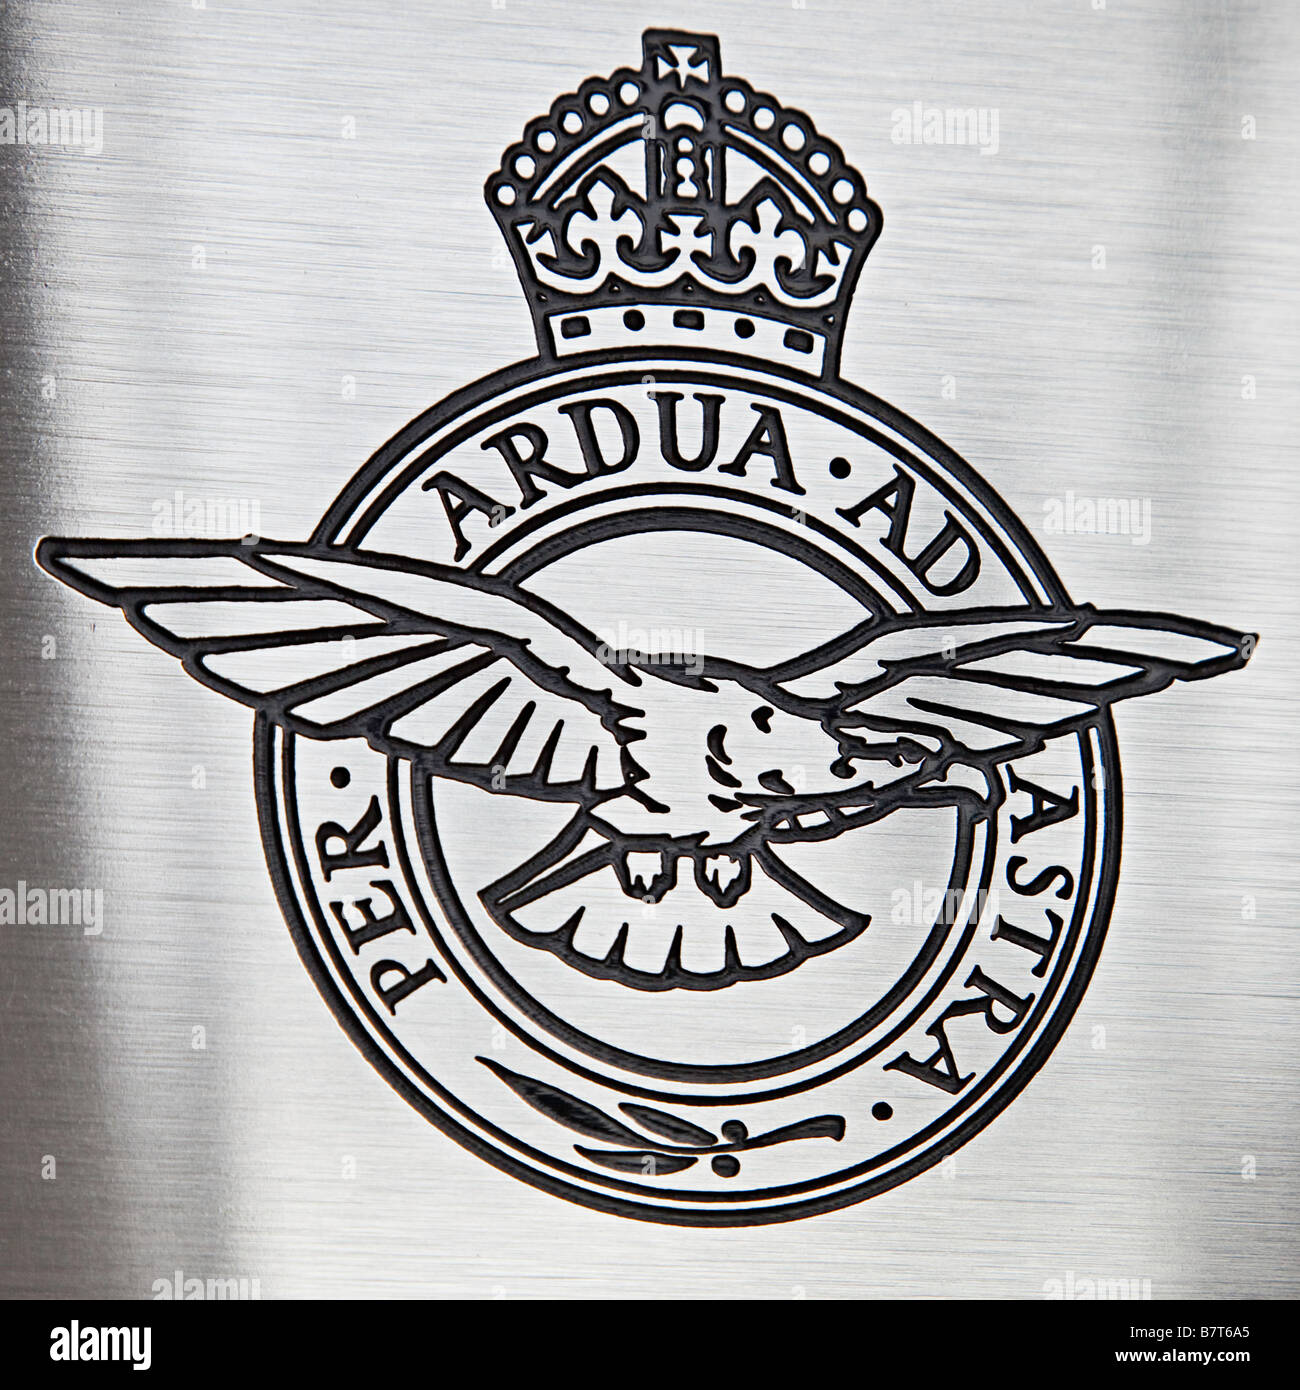 Royal Air Force Badge - Motto Through Struggle To The Stars - Eagle Volant & Affronty Head Sinister & Imperial Crown - Runnymede Stock Photo